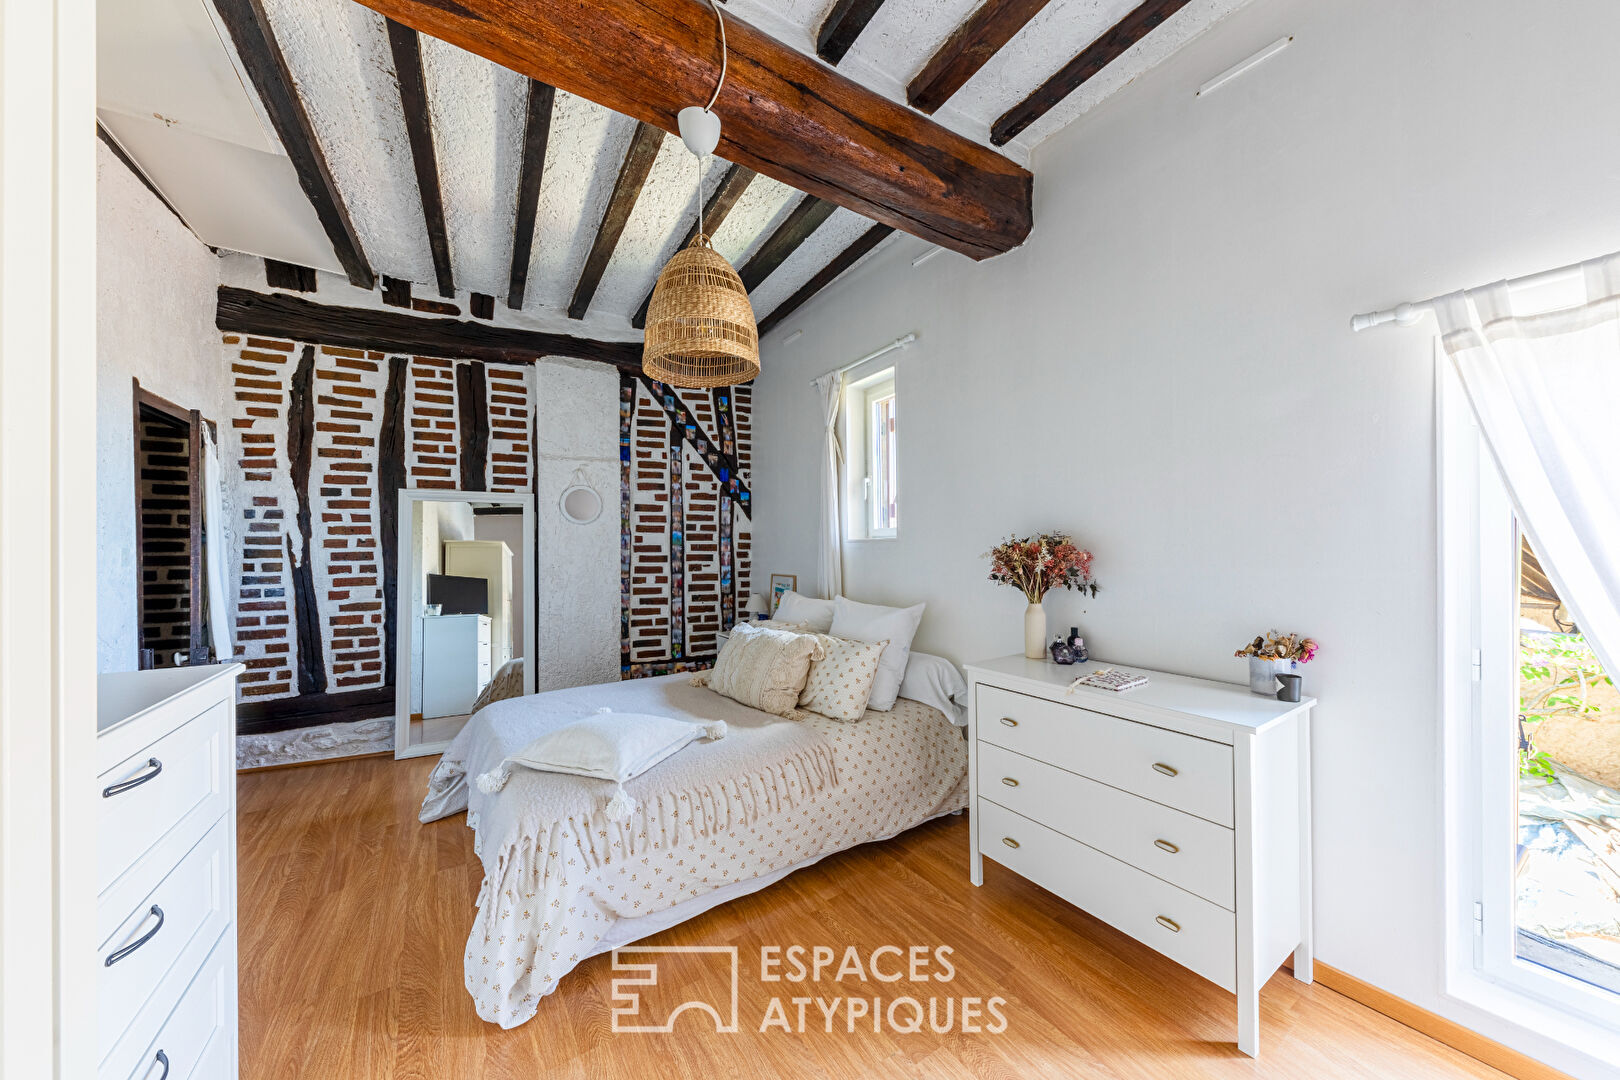 Atypical charm for this historic house in the old center of Buchelay